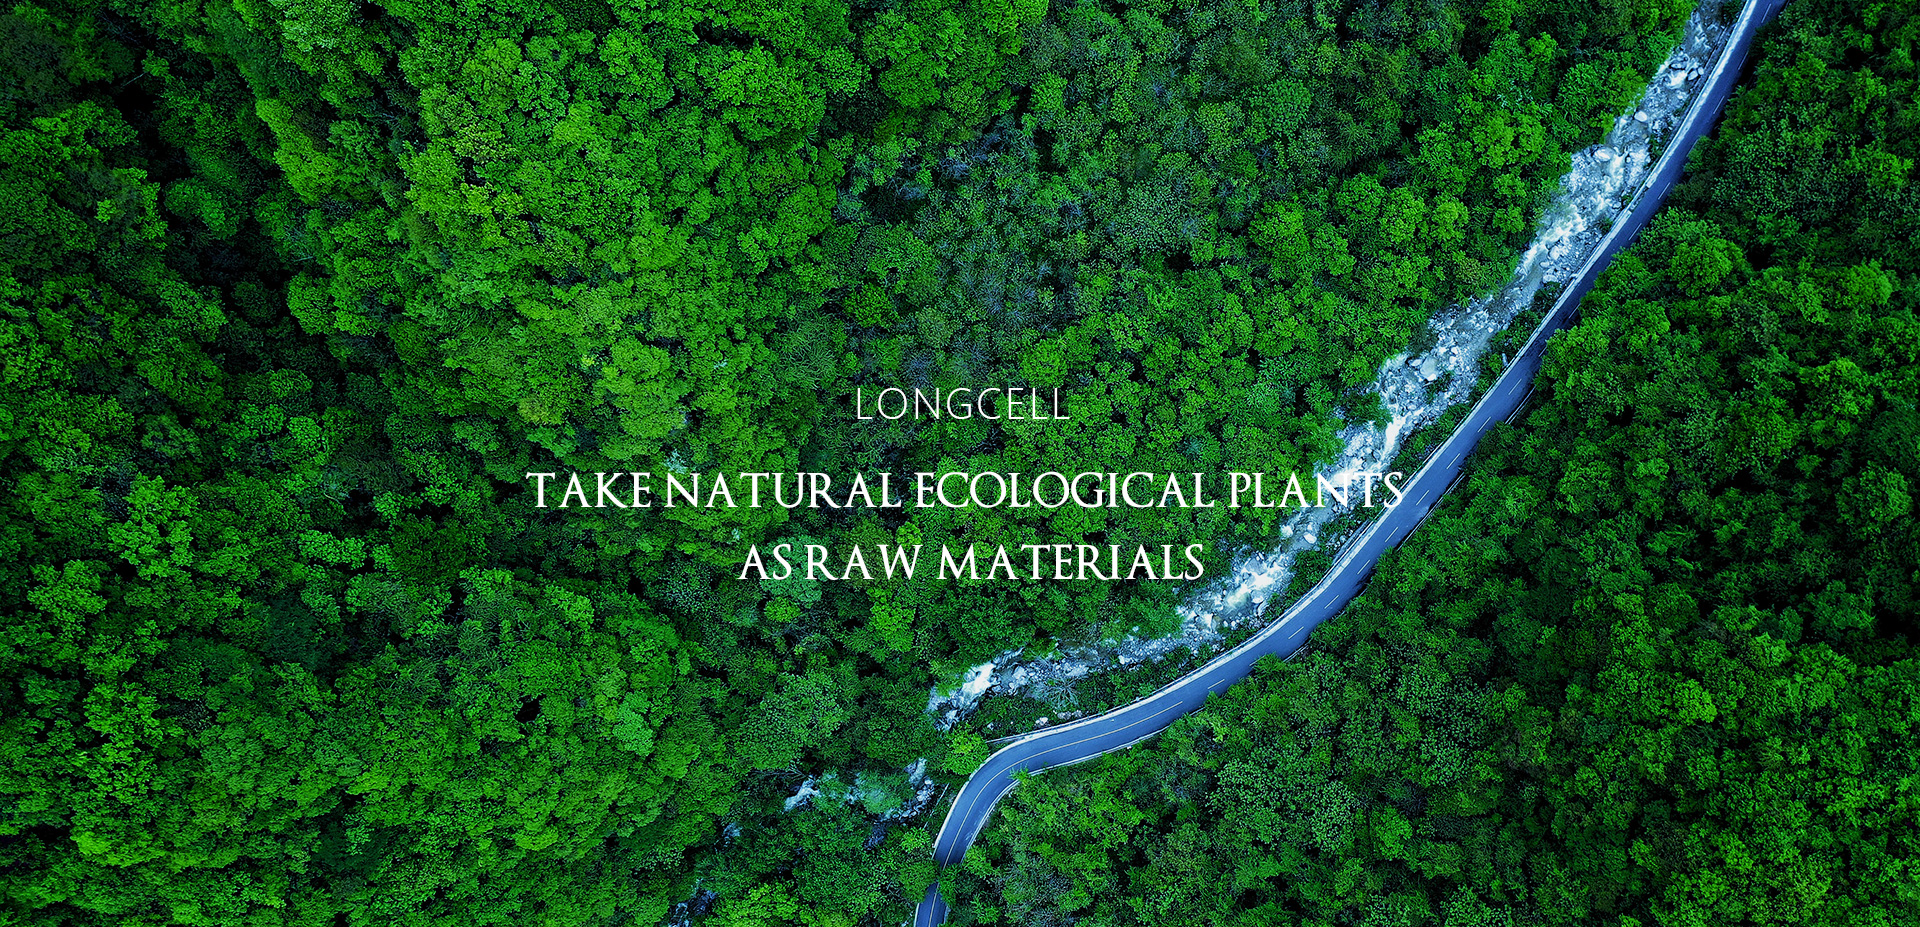 Take natural ecological plants as raw materials